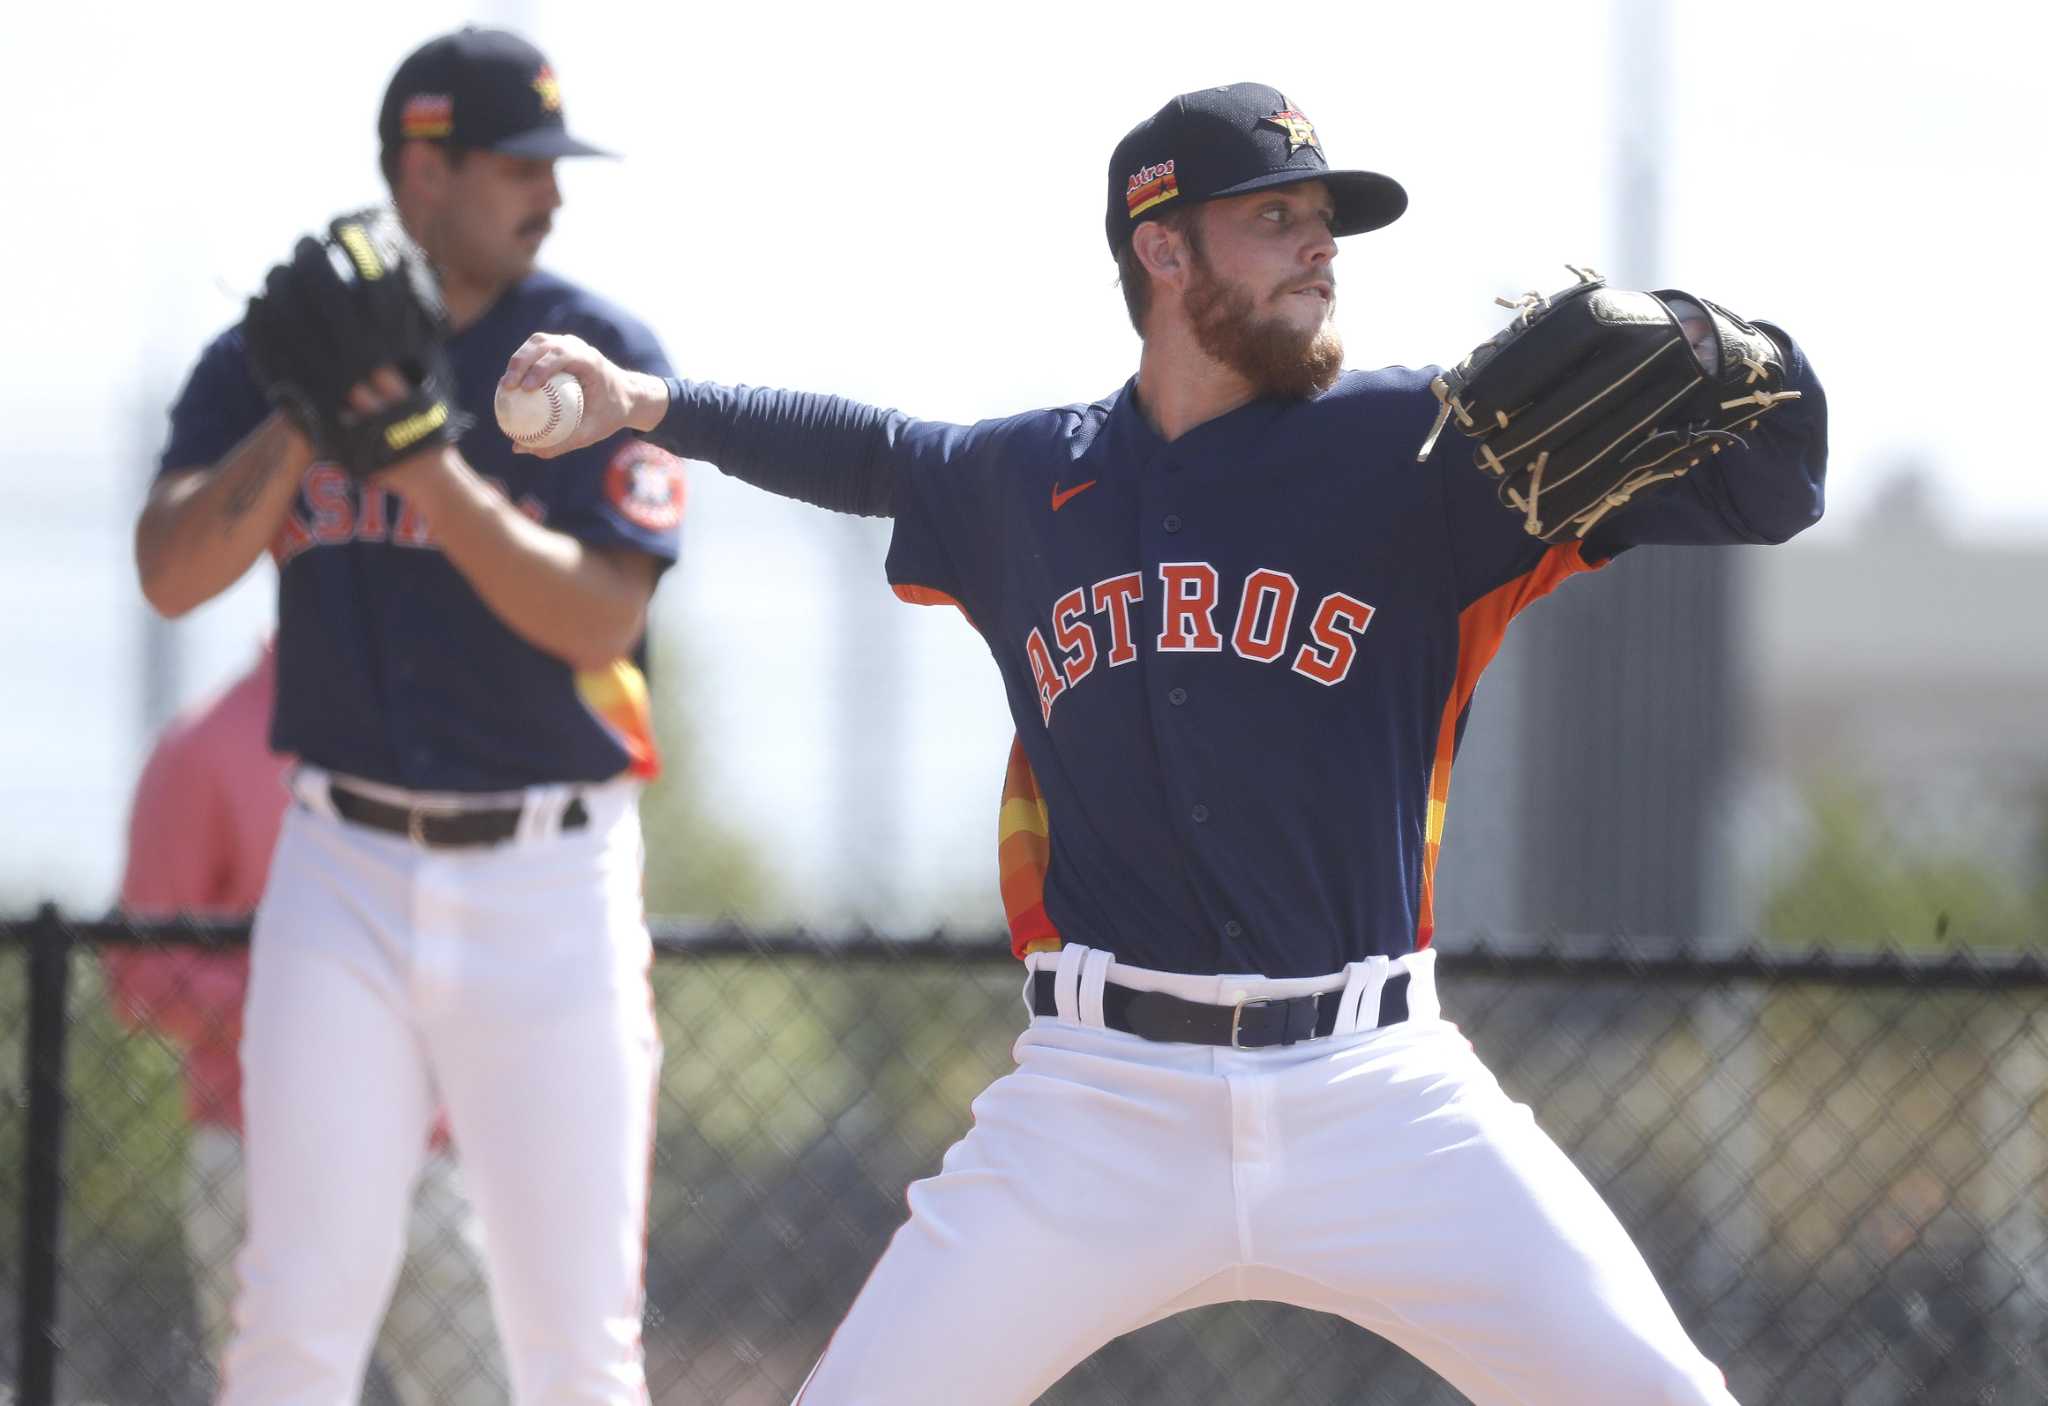 3 Astros on the 40 man roster who won't survive the season